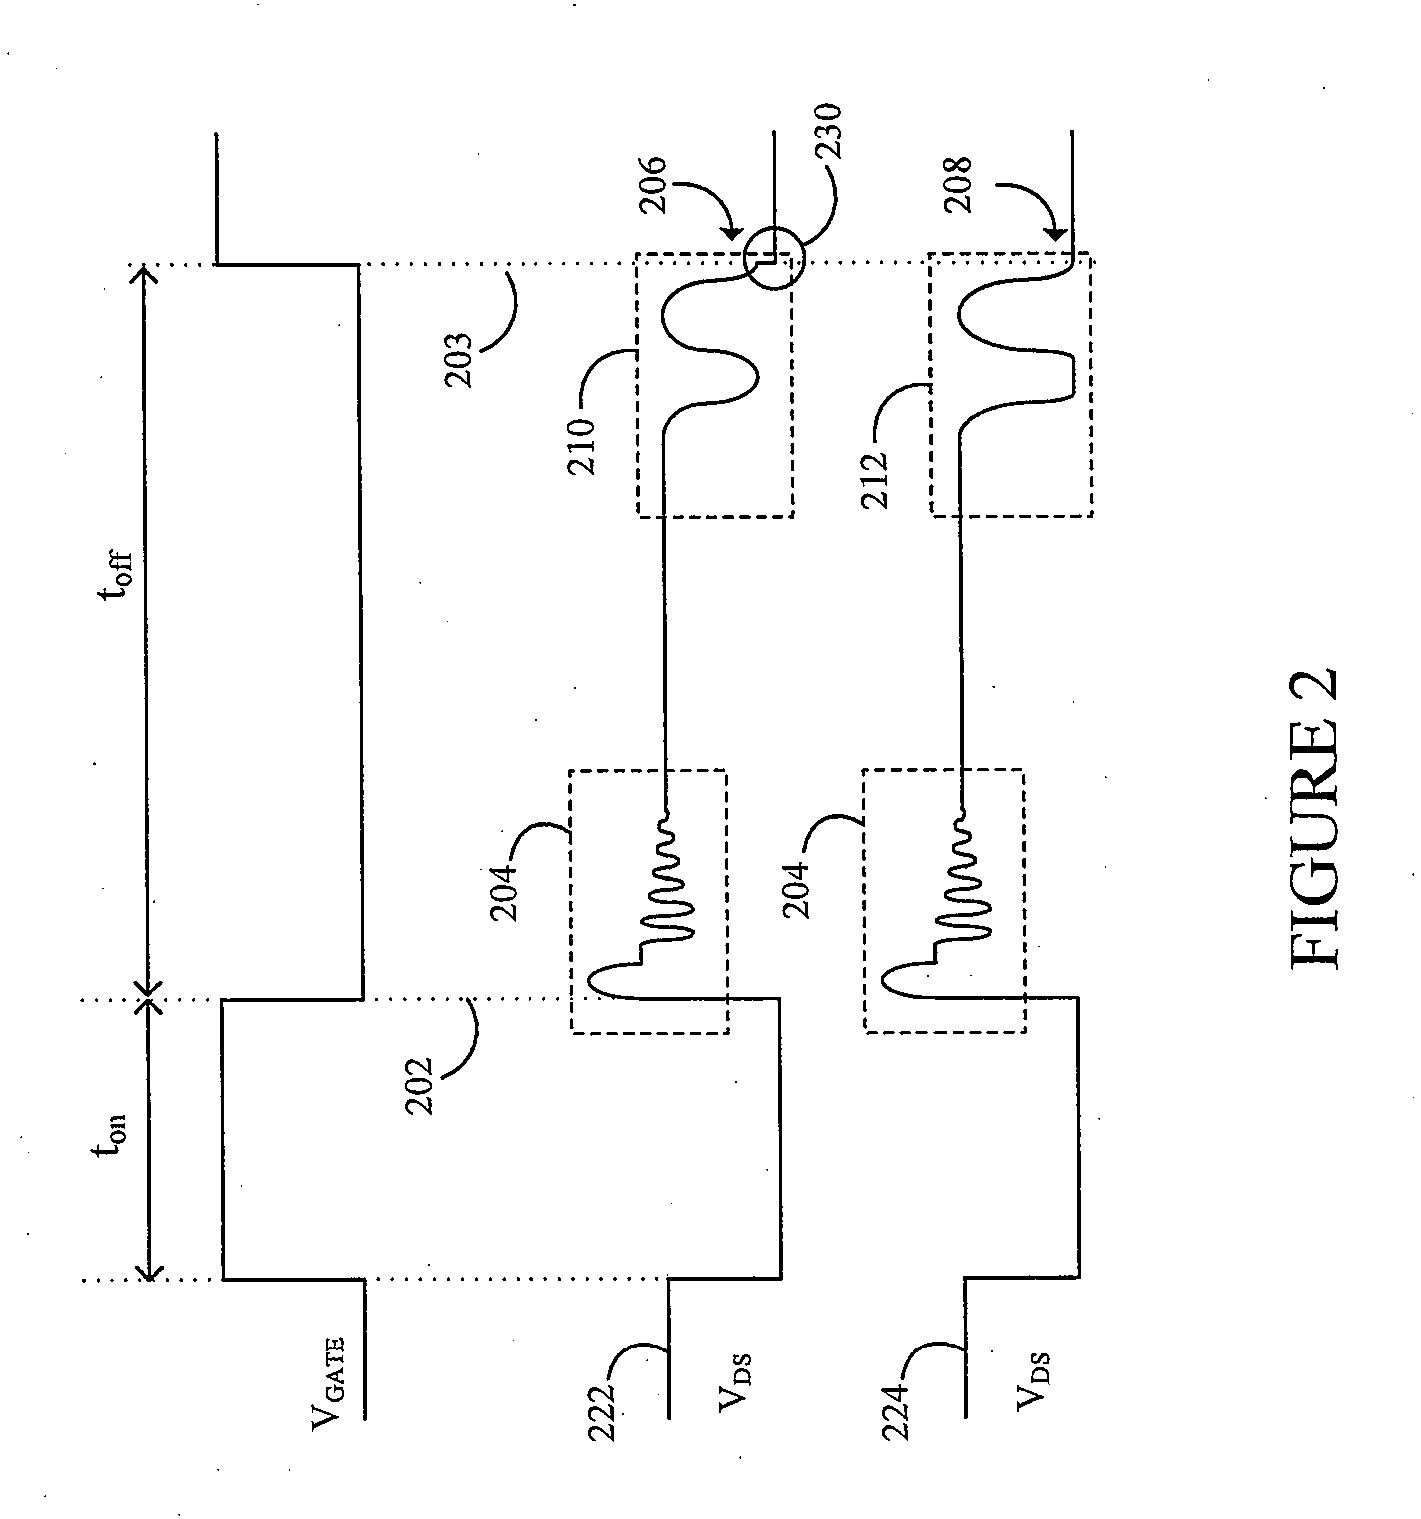 System and Method for Emissions Suppression in a Switch-Mode Power Supply